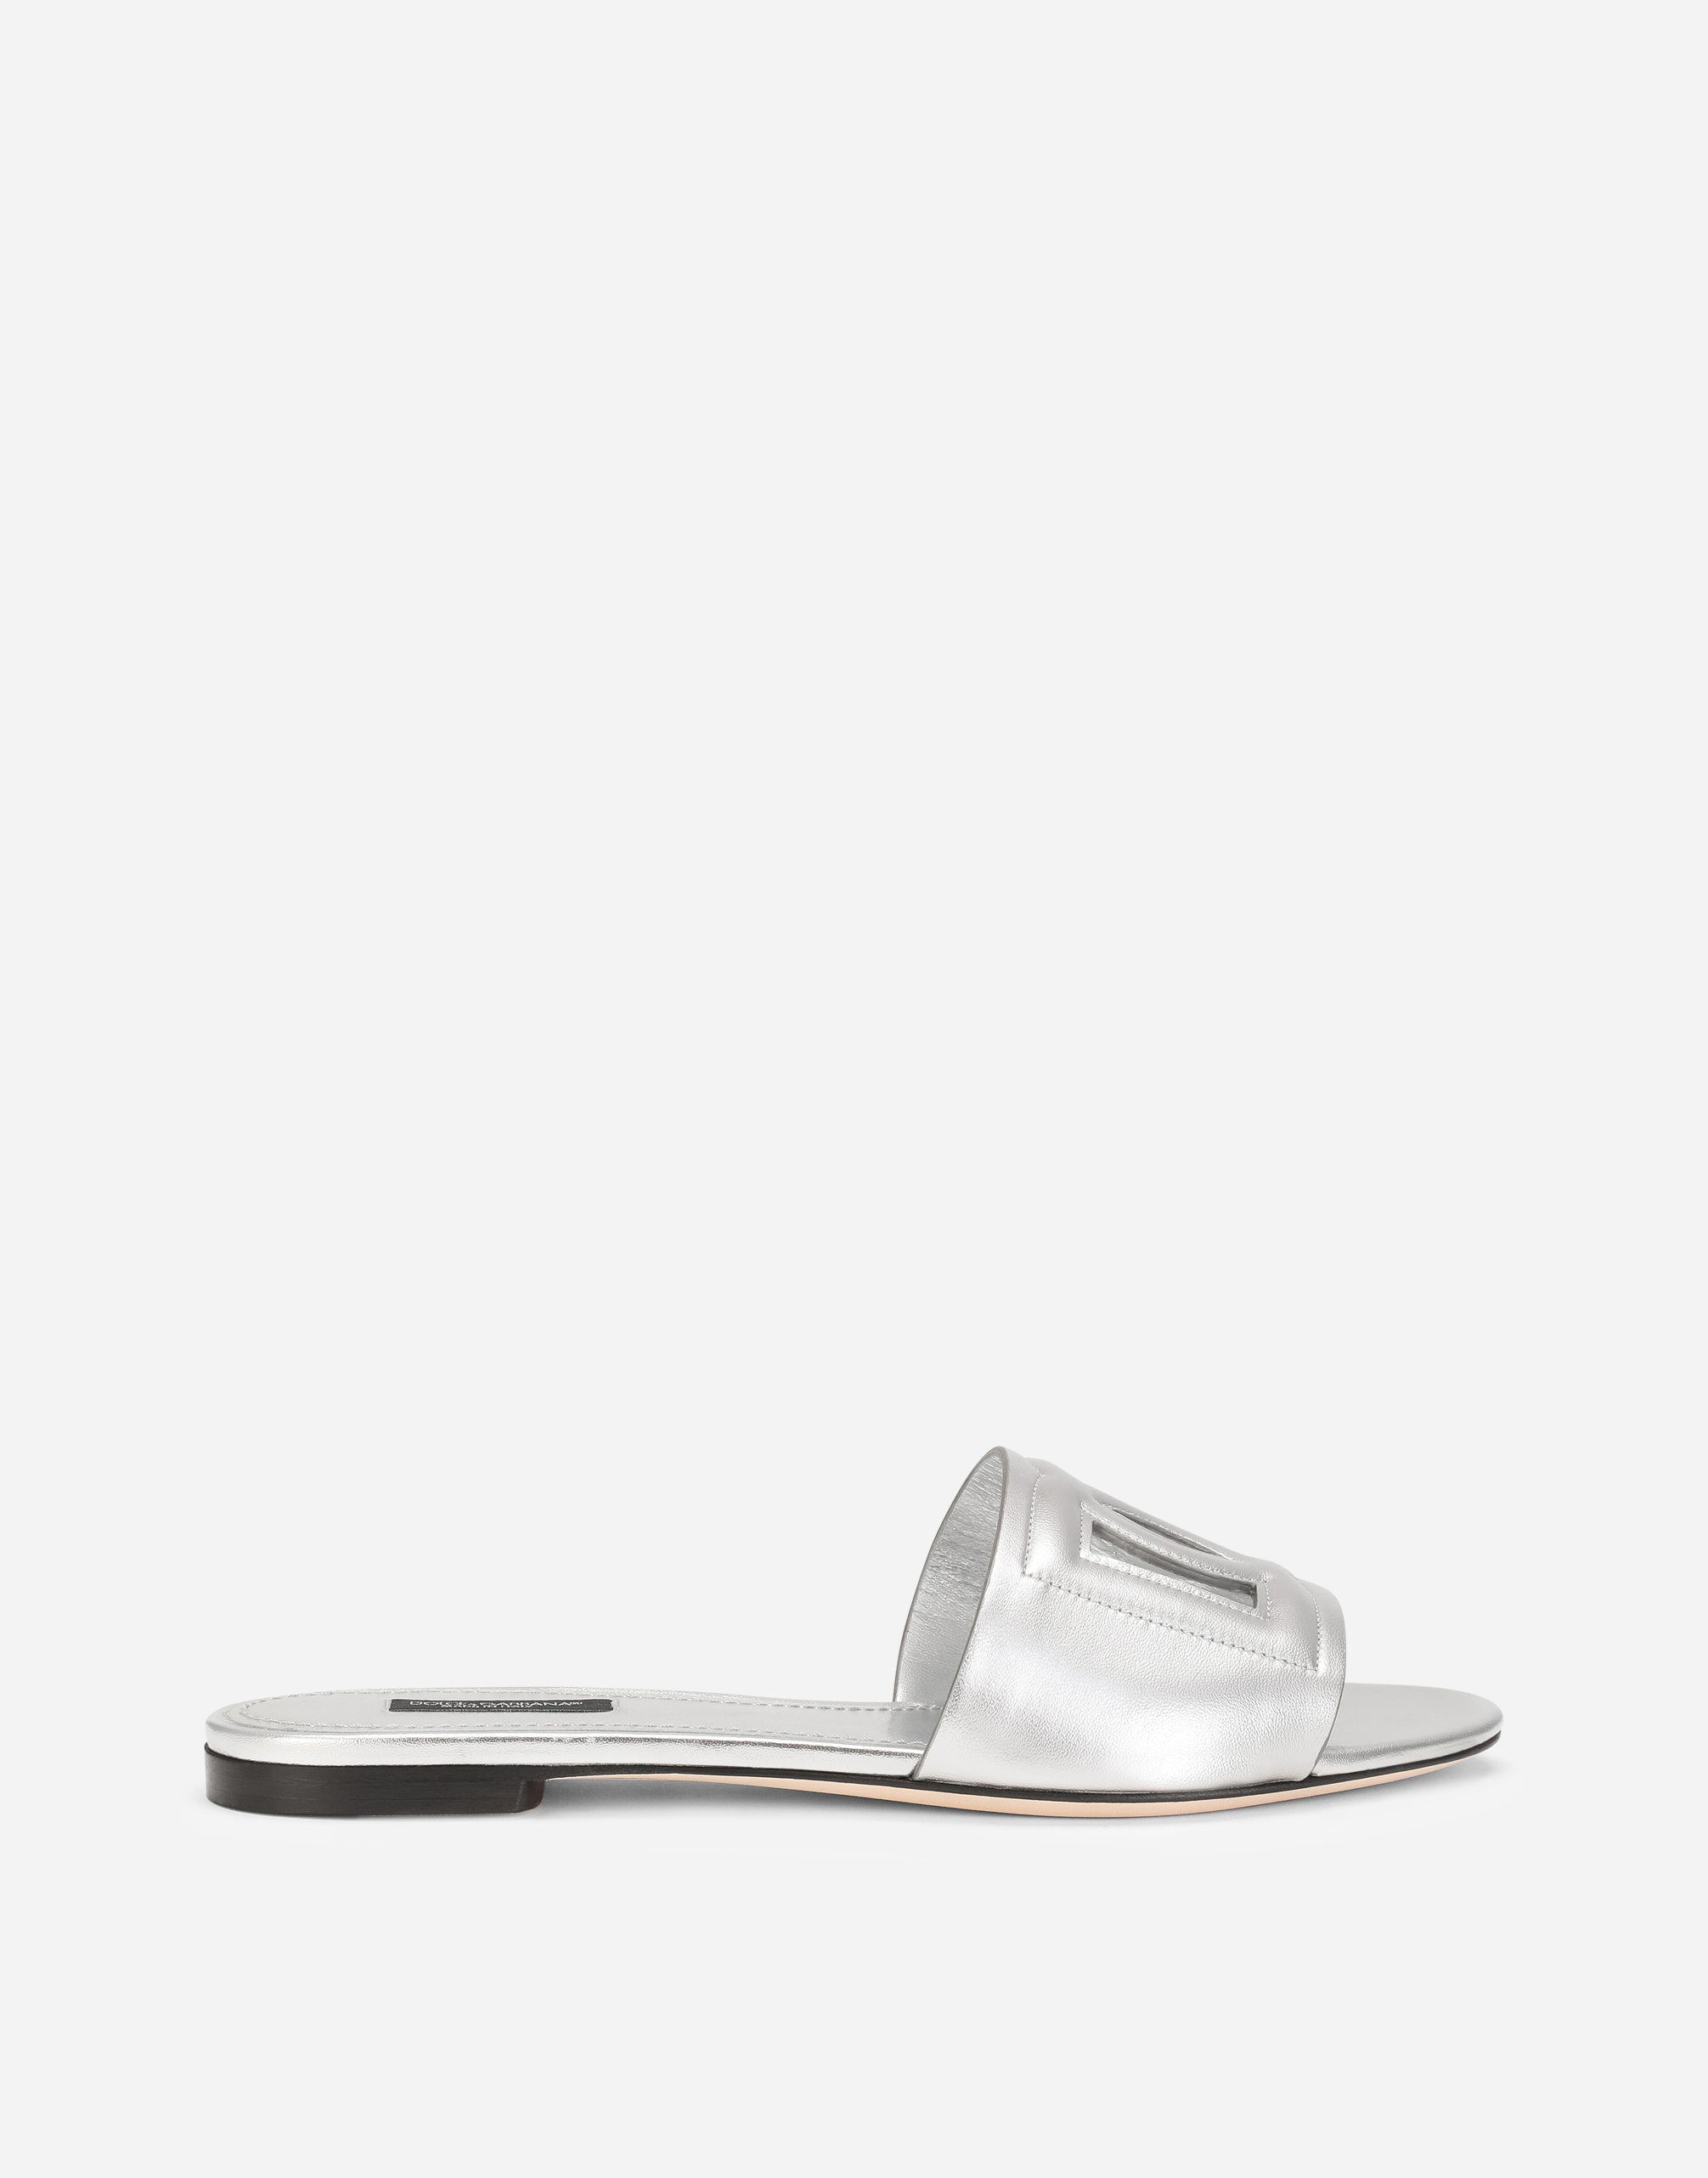 Nappa mordore slides with DG Millennials logo in Silver